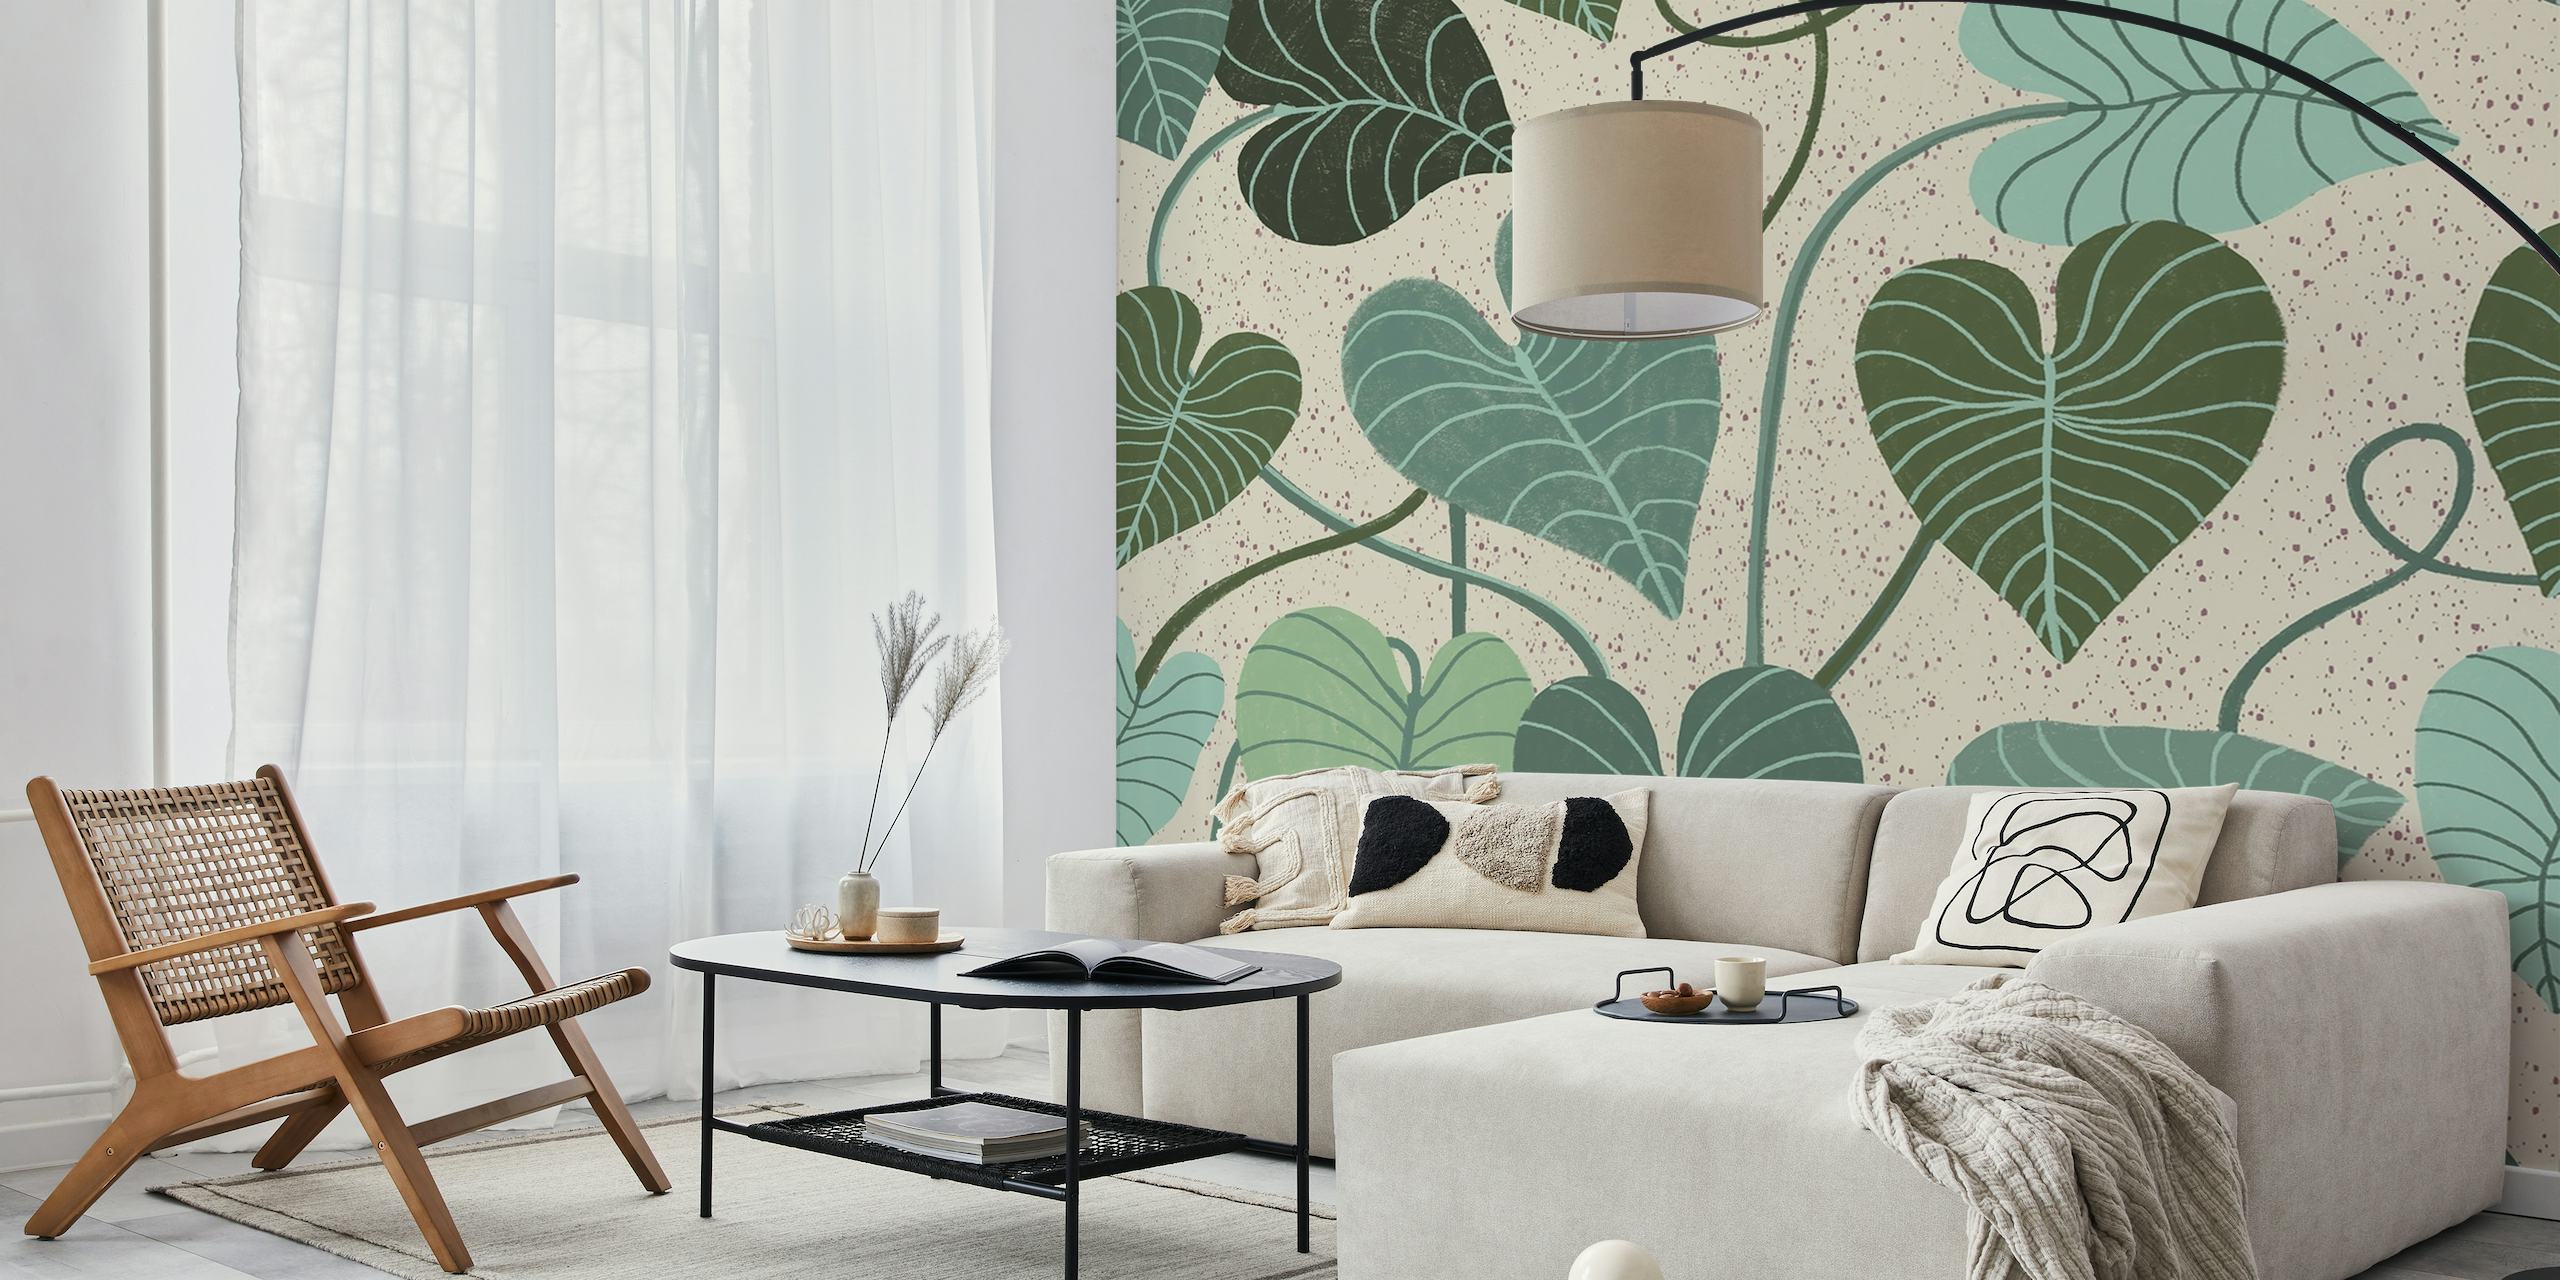 Leaf wall mural with intricate botanical illustrations in shades of green